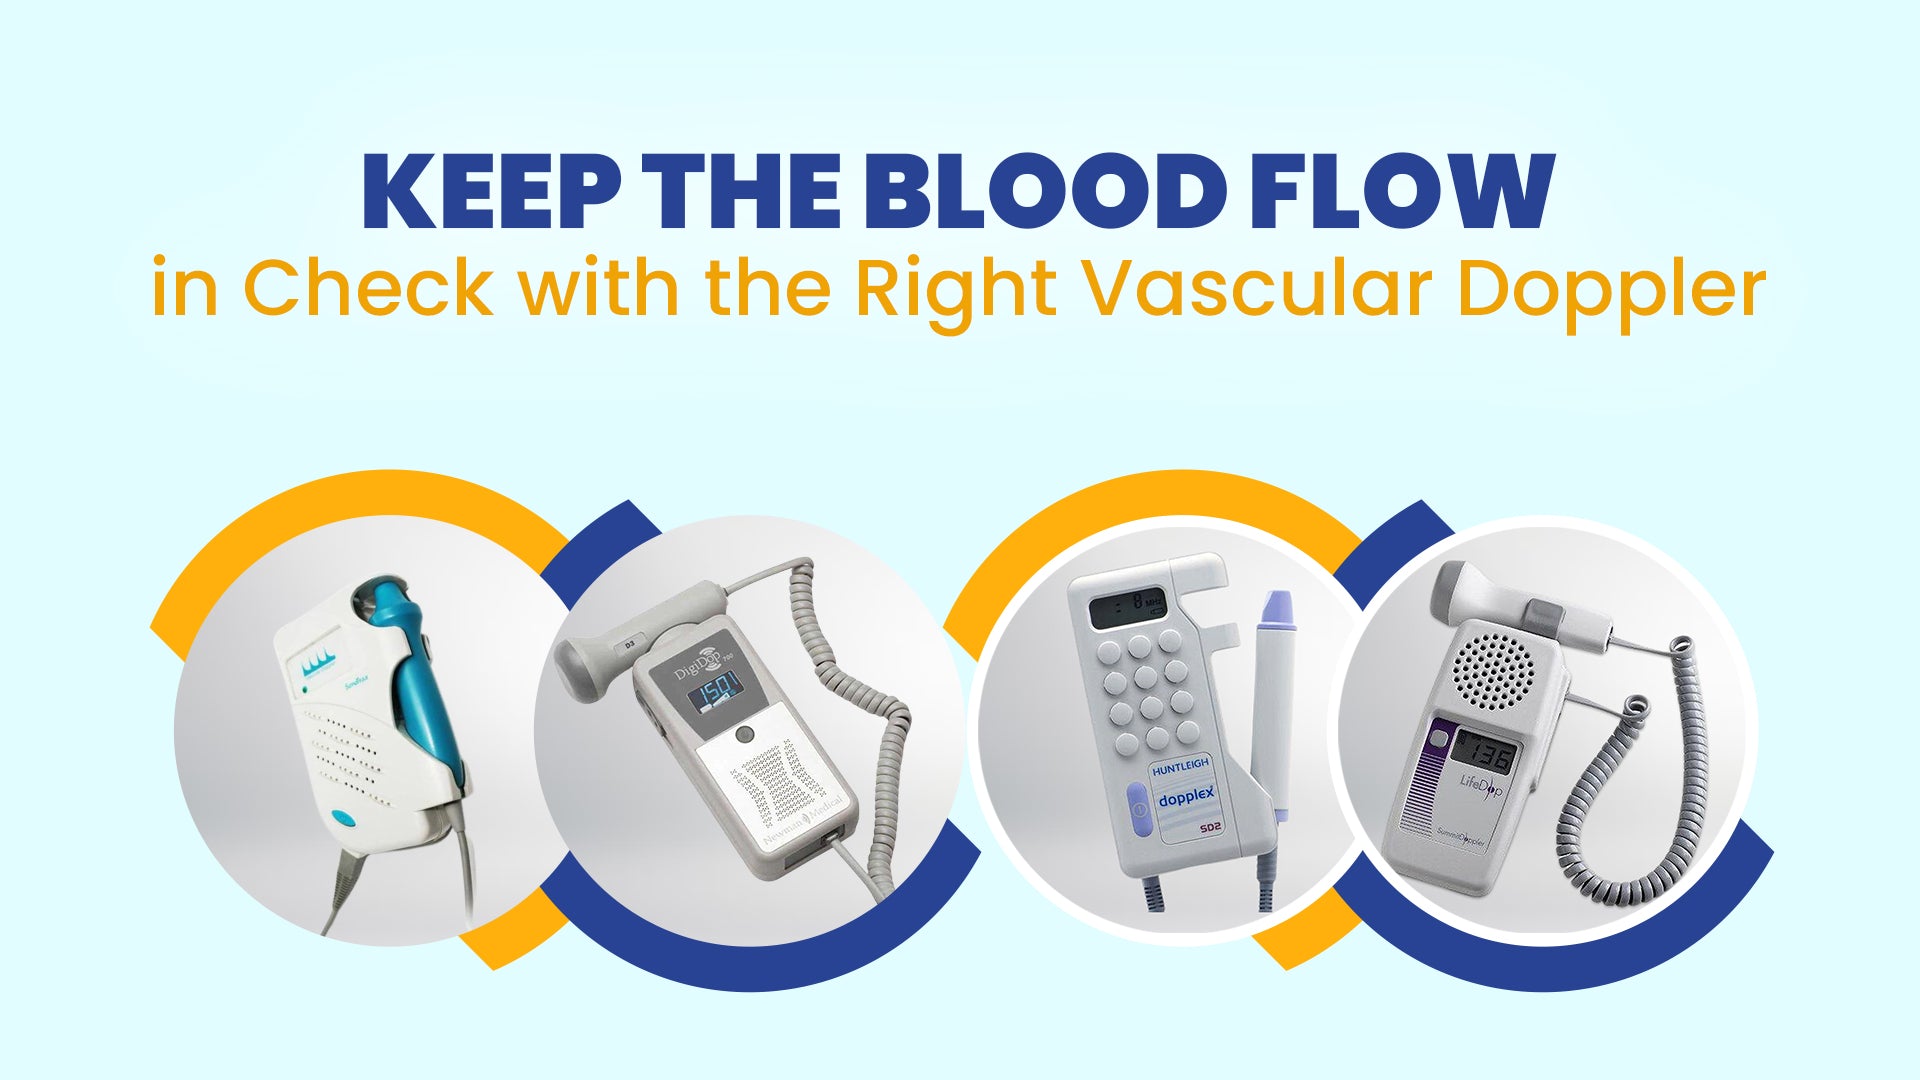 Choosing the Right Vascular Doppler_ Comparing Edan, Huntleigh, Newman Medical, and Summit Doppler Options from MFI Medical